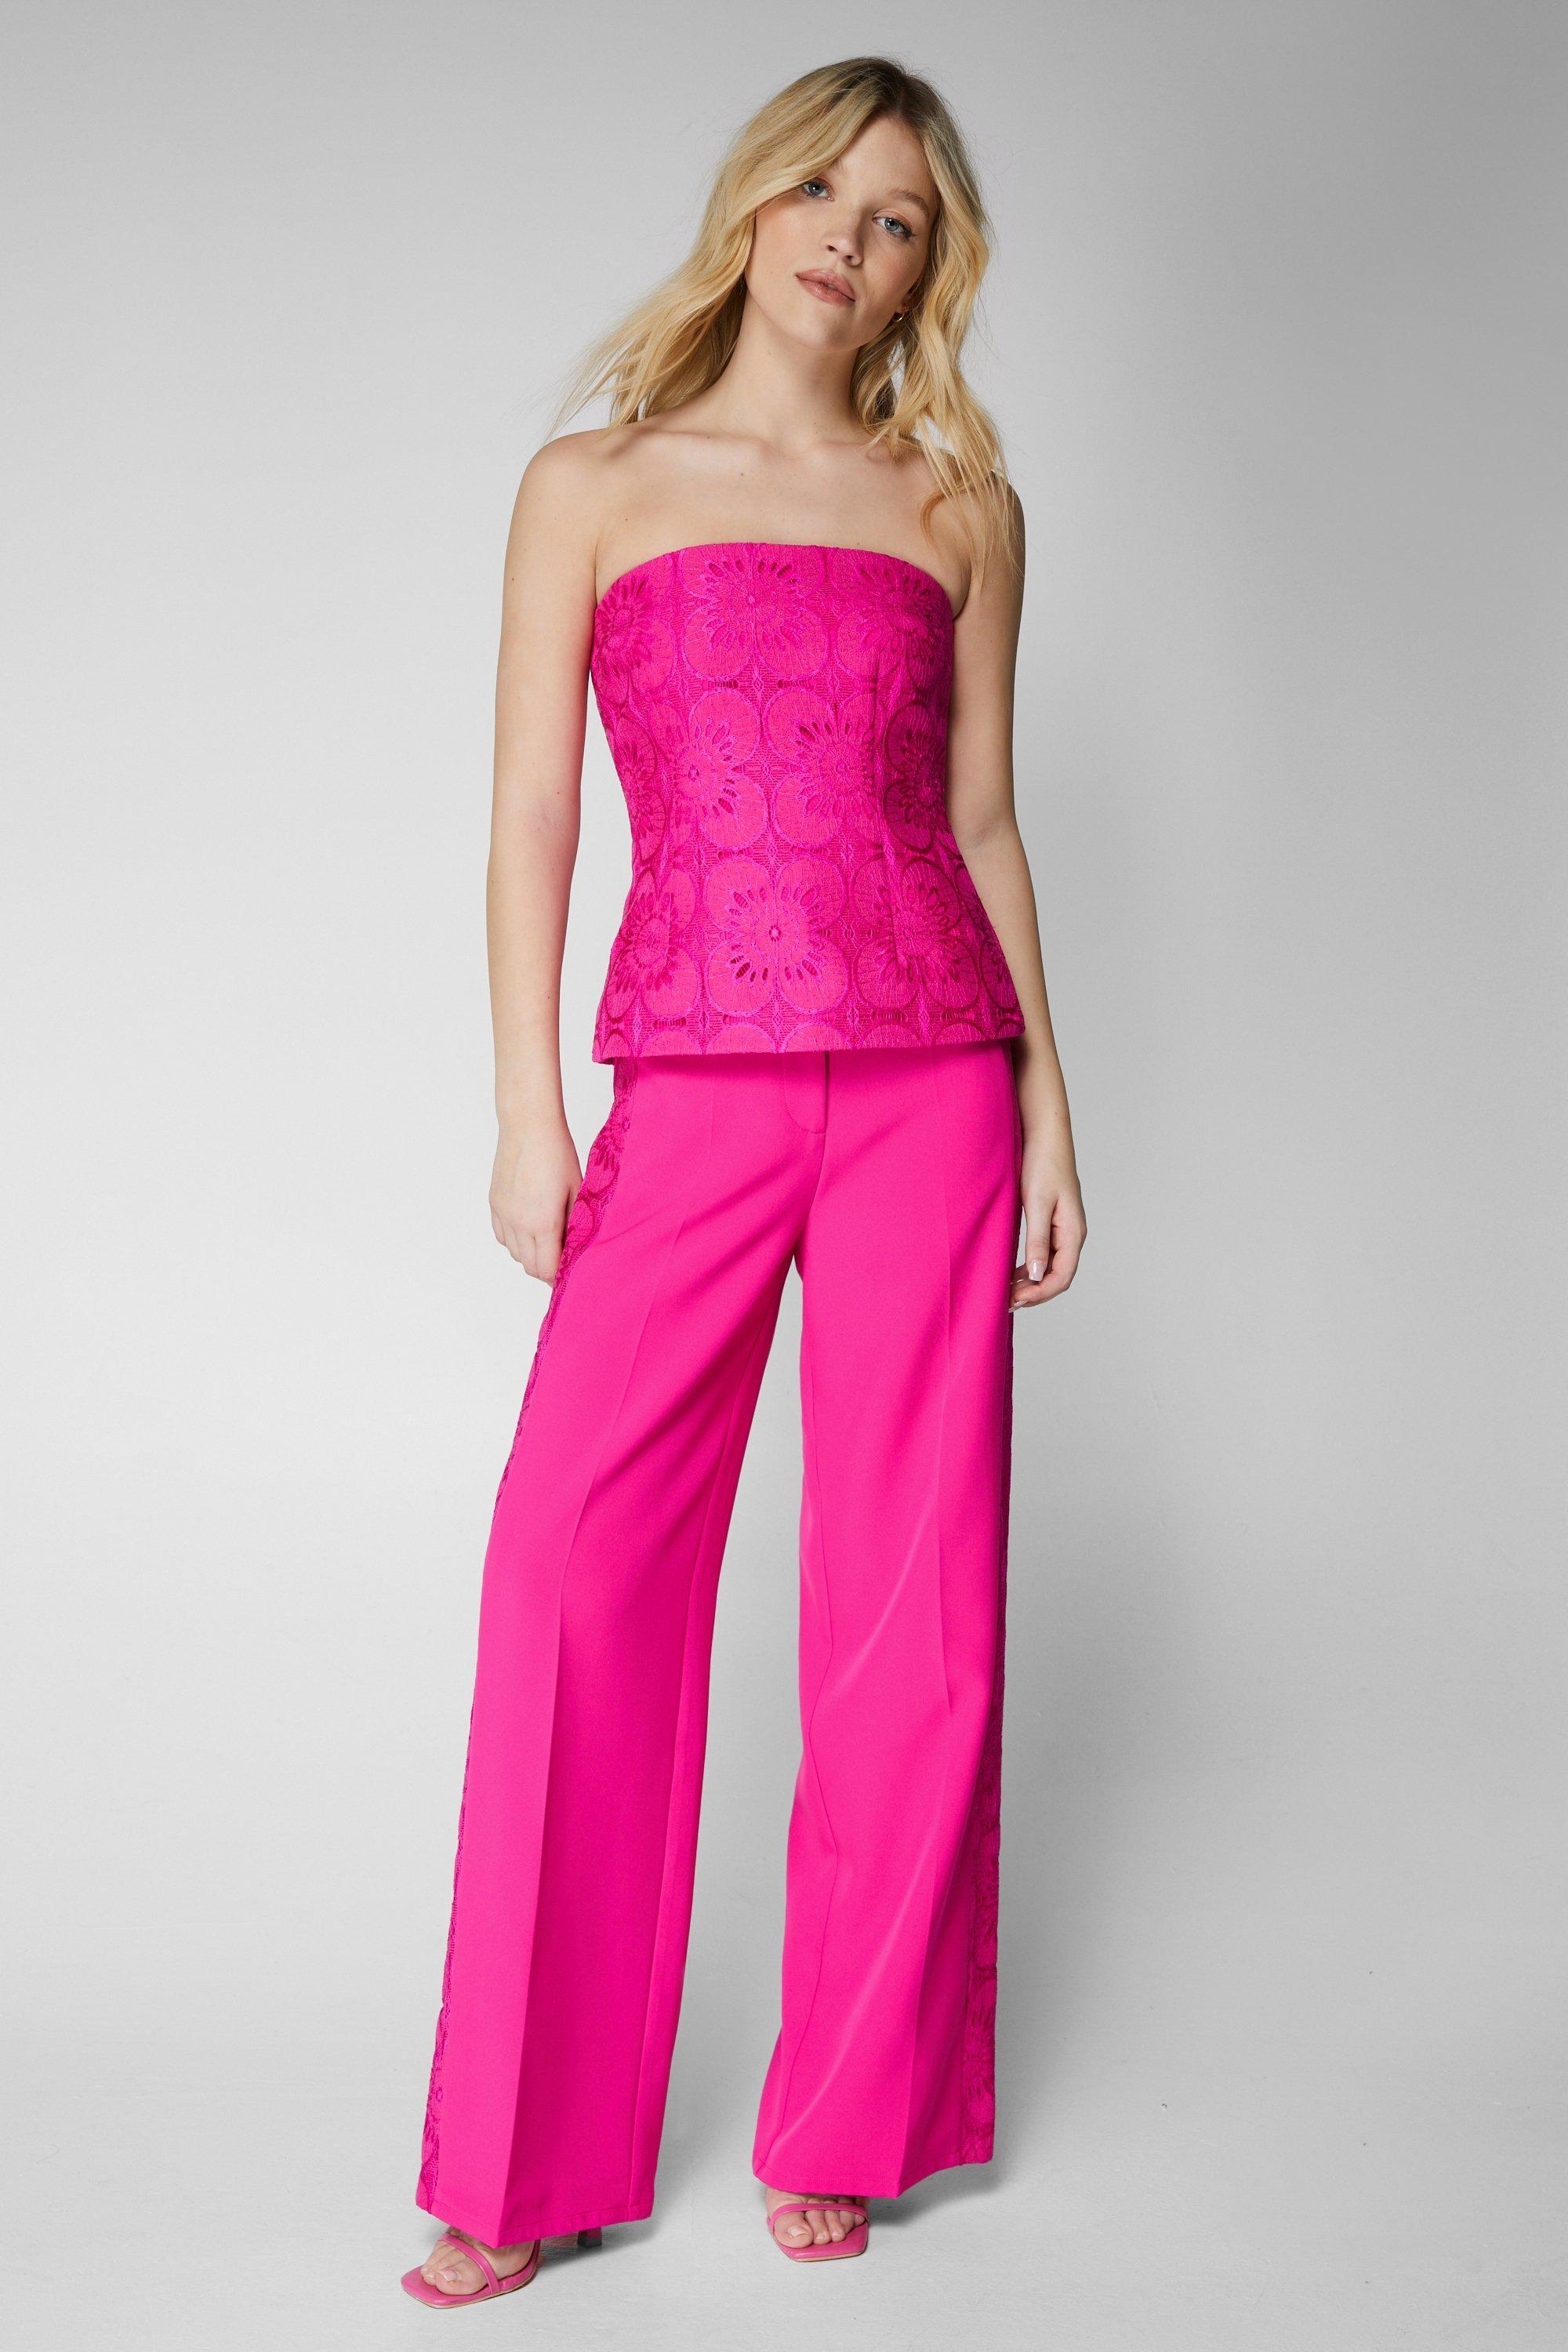 Model wearing a strapless pink peplum top and matching wide-leg trousers